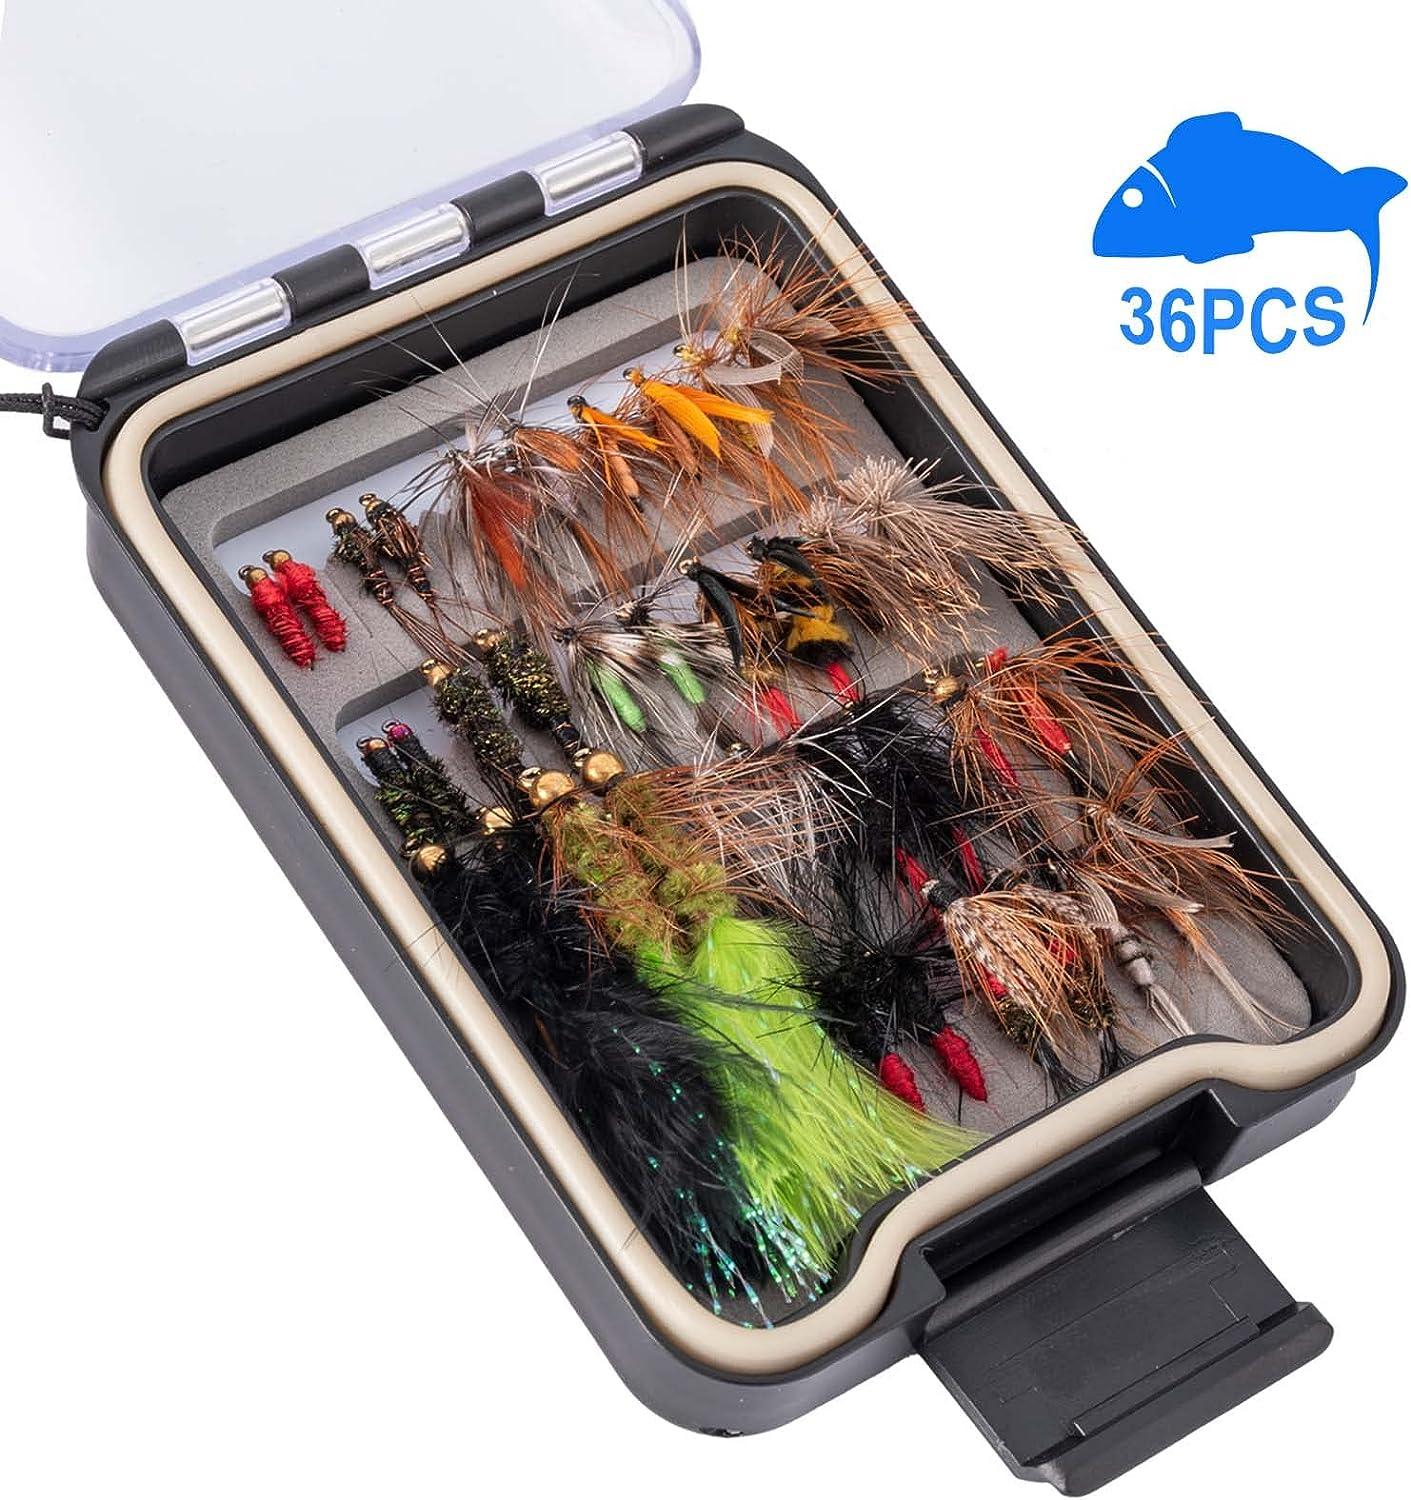 40pcs Fly Fishing Dry Flies Assortment Kit with Waterproof Fly Box for Fishing, Size: 11.5, Black